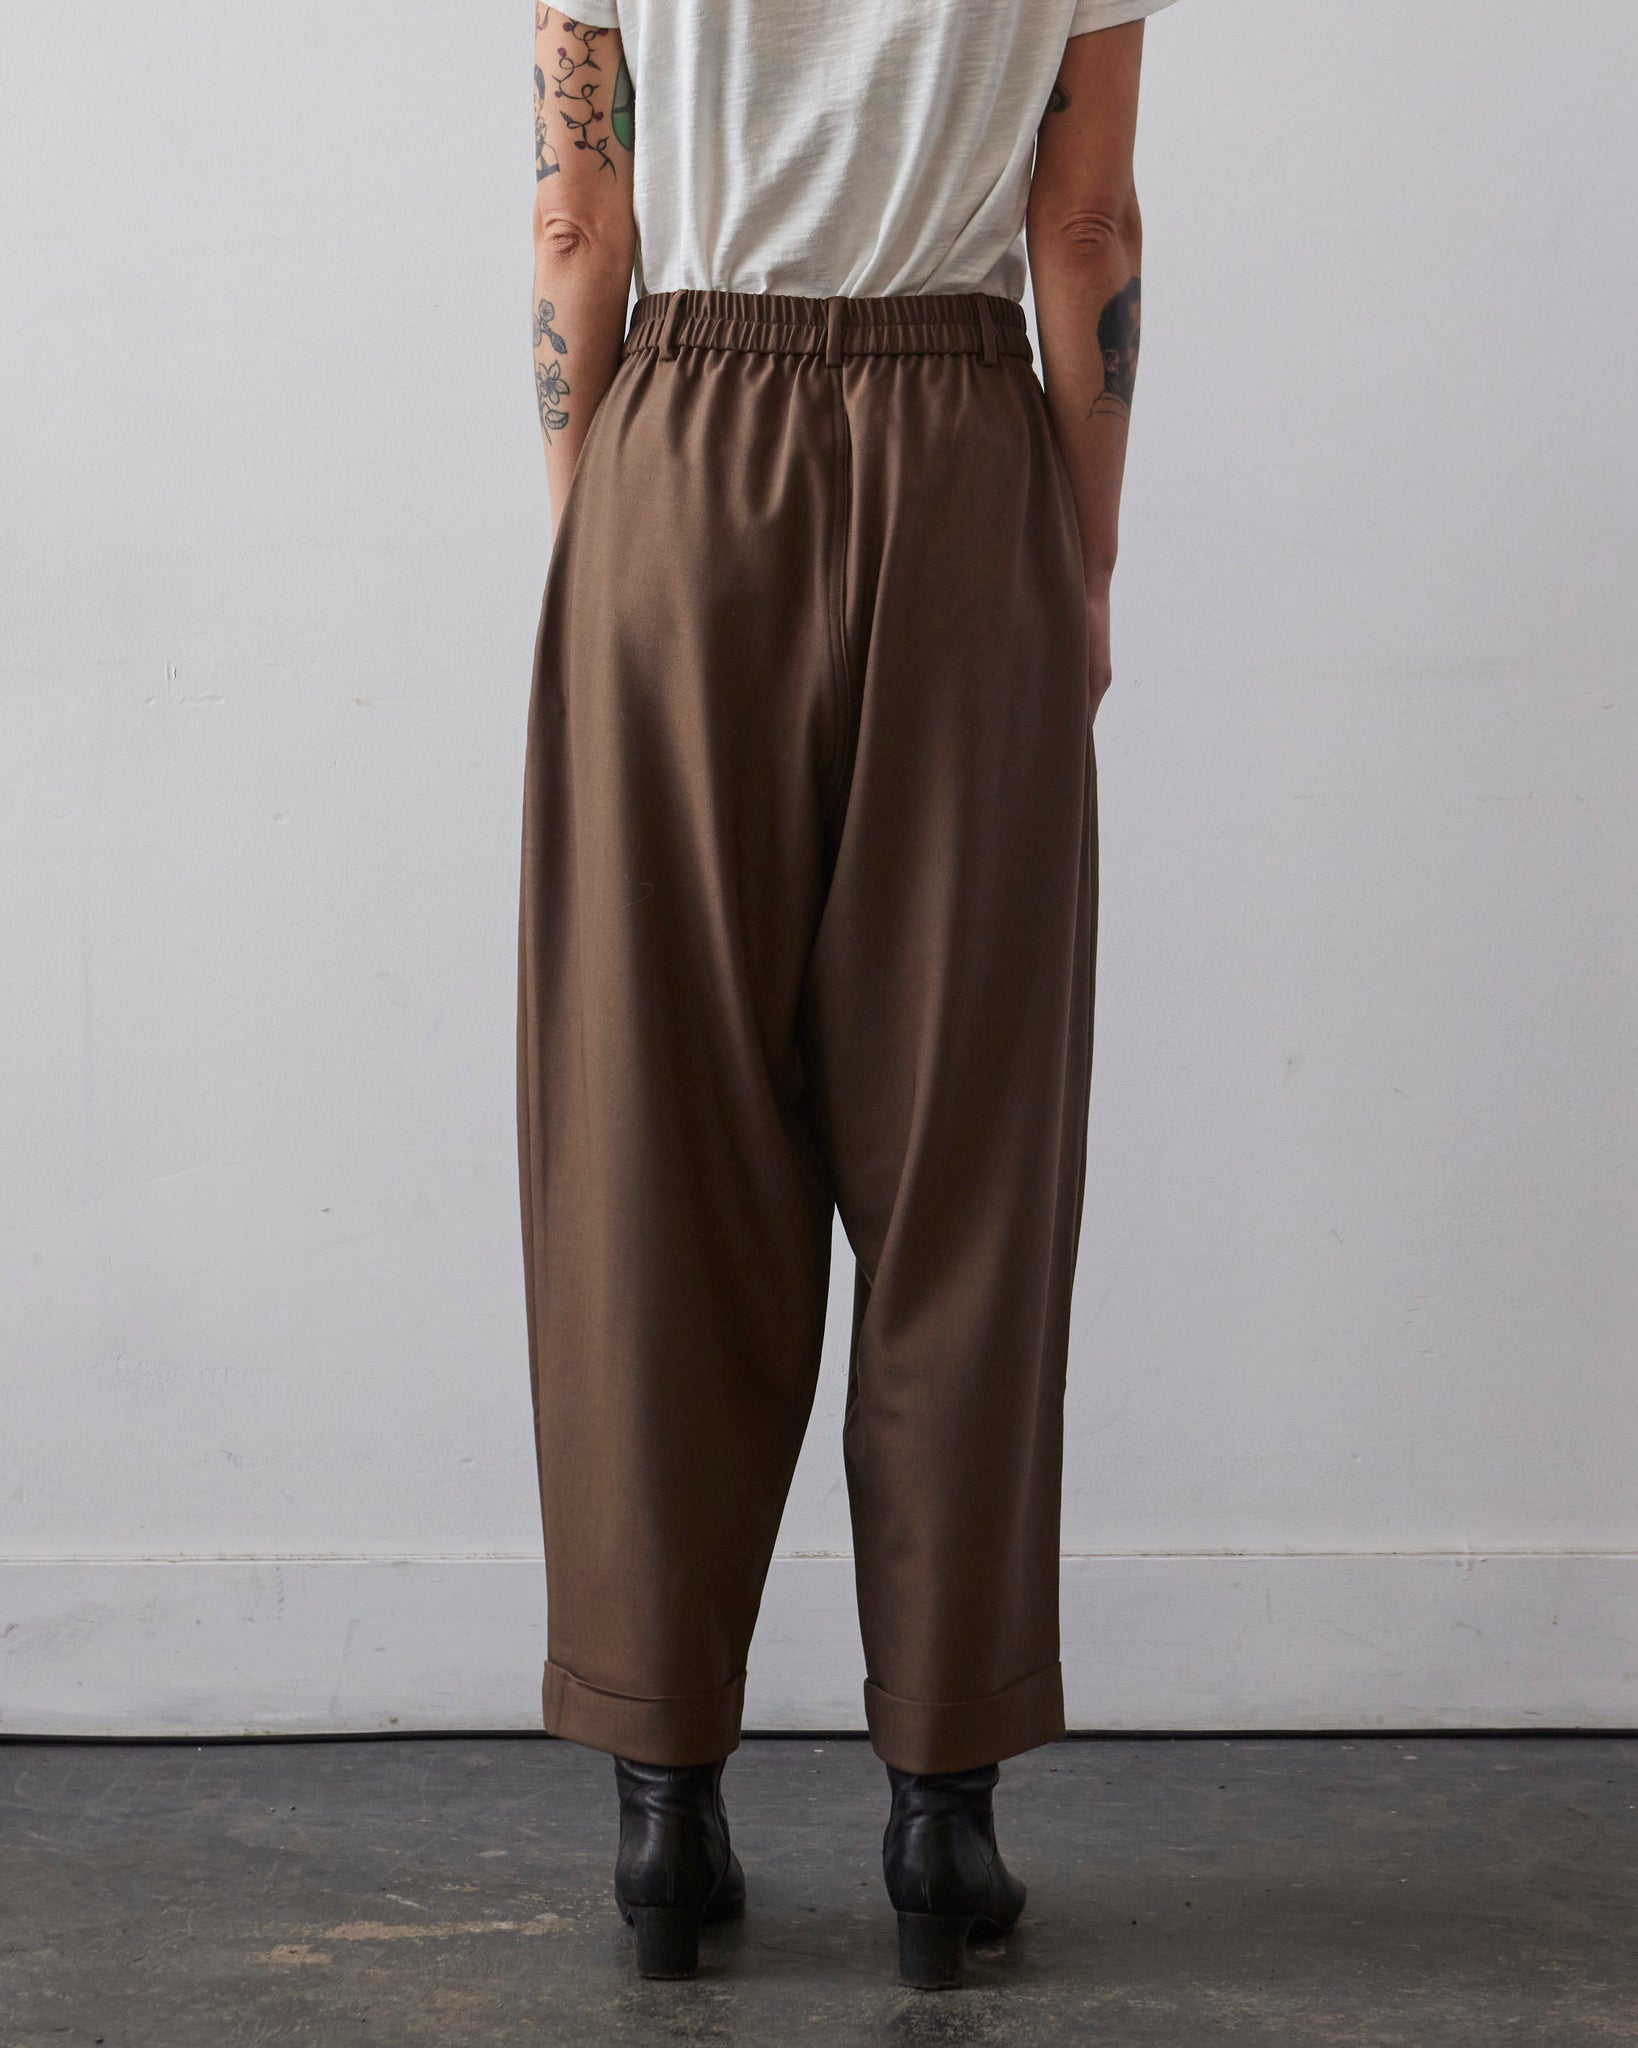 CORDERA - Corduroy Carrot Pants in Off White